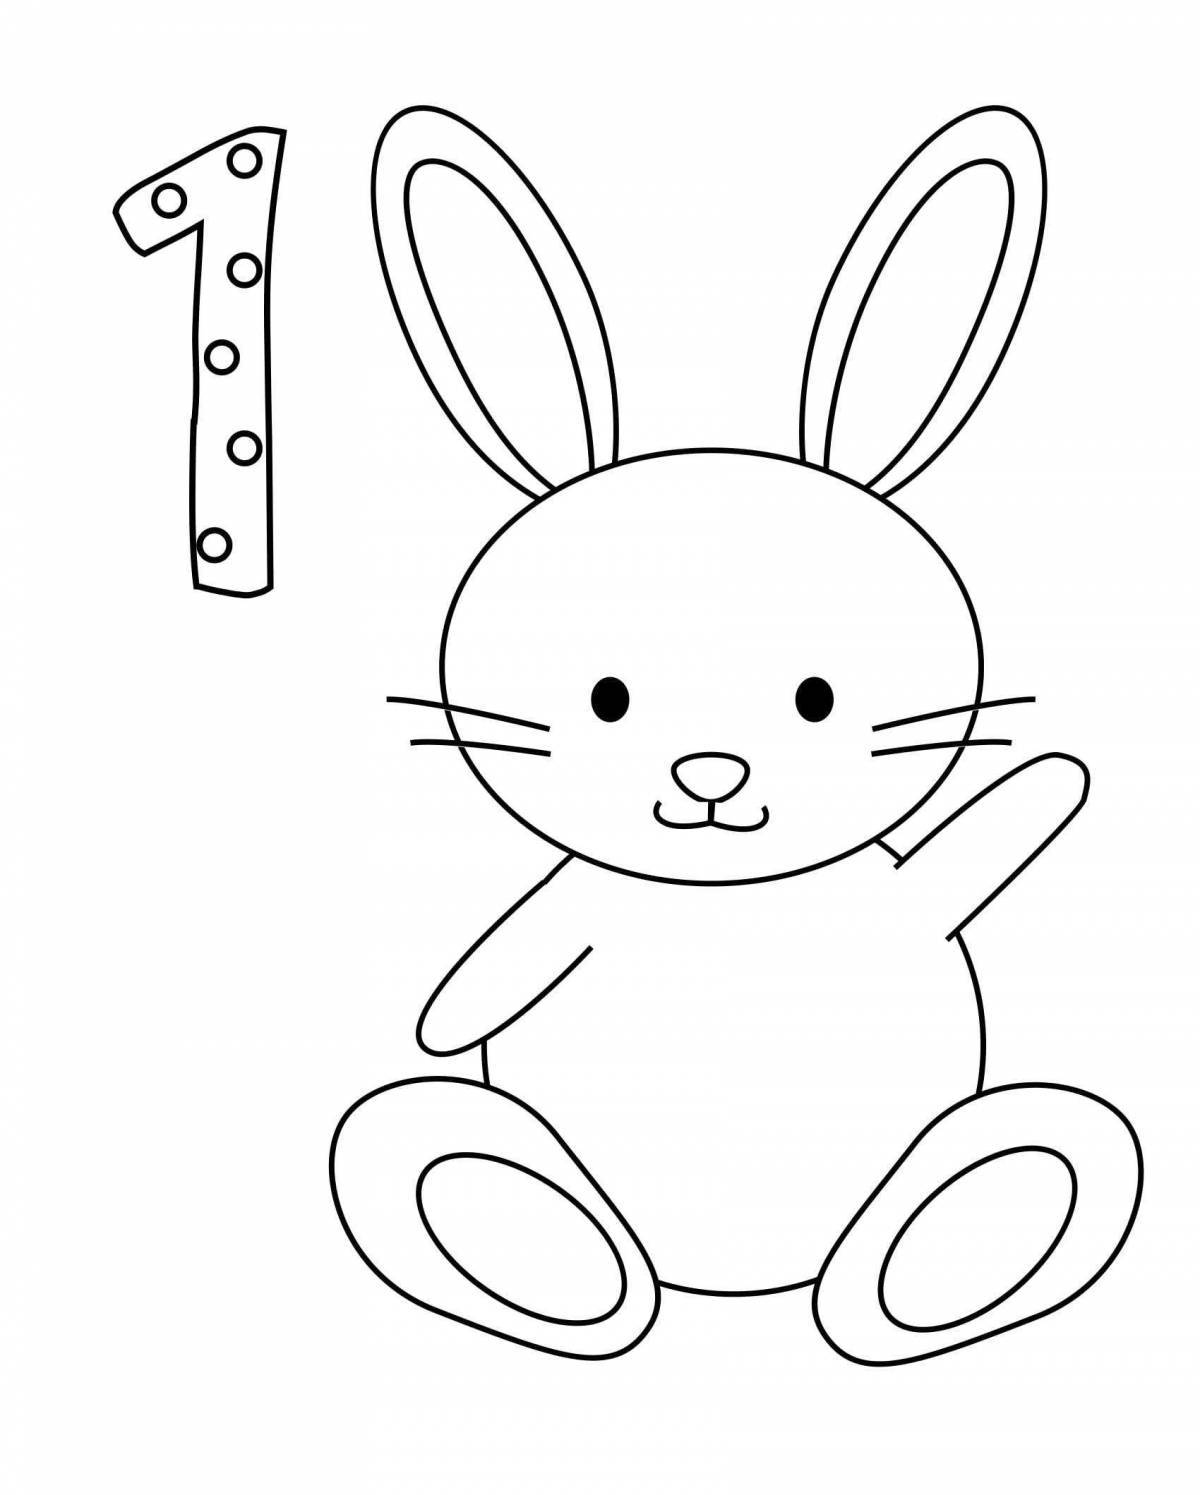 Coloring rabbit with big legs